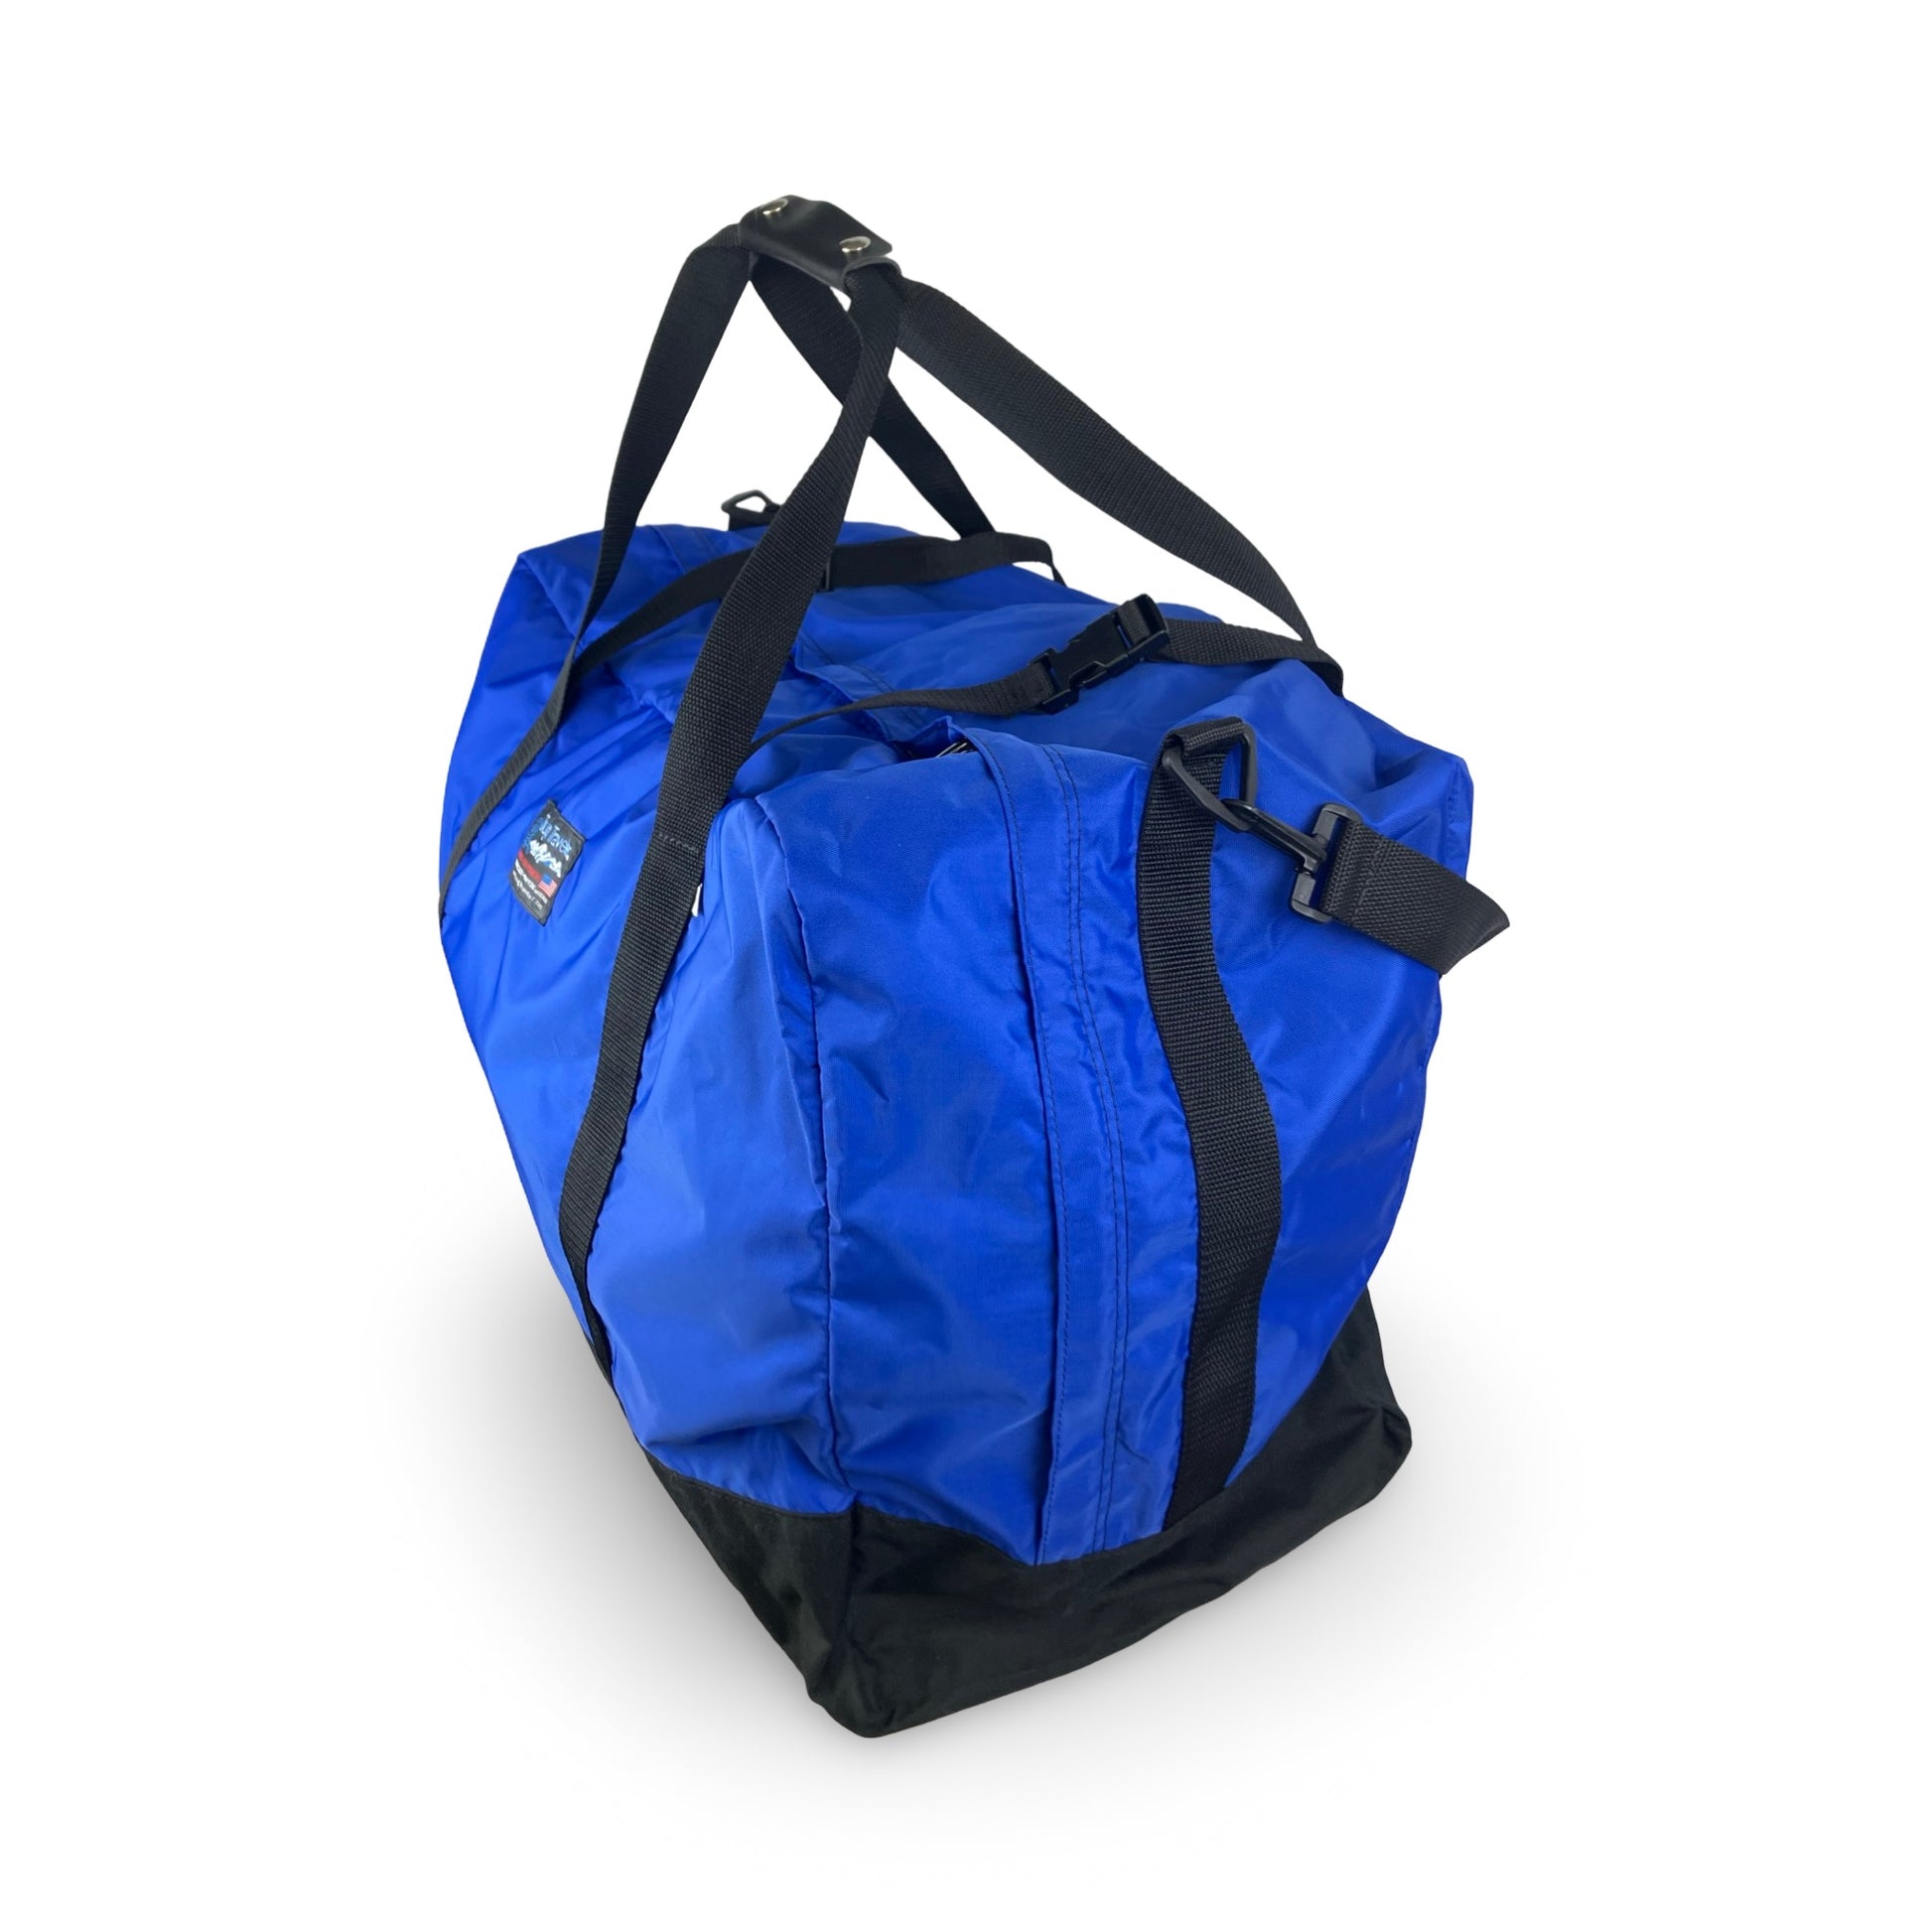 EXPEDITION Duffel Duffel Bags, by Tough Traveler. Made in USA since 1970